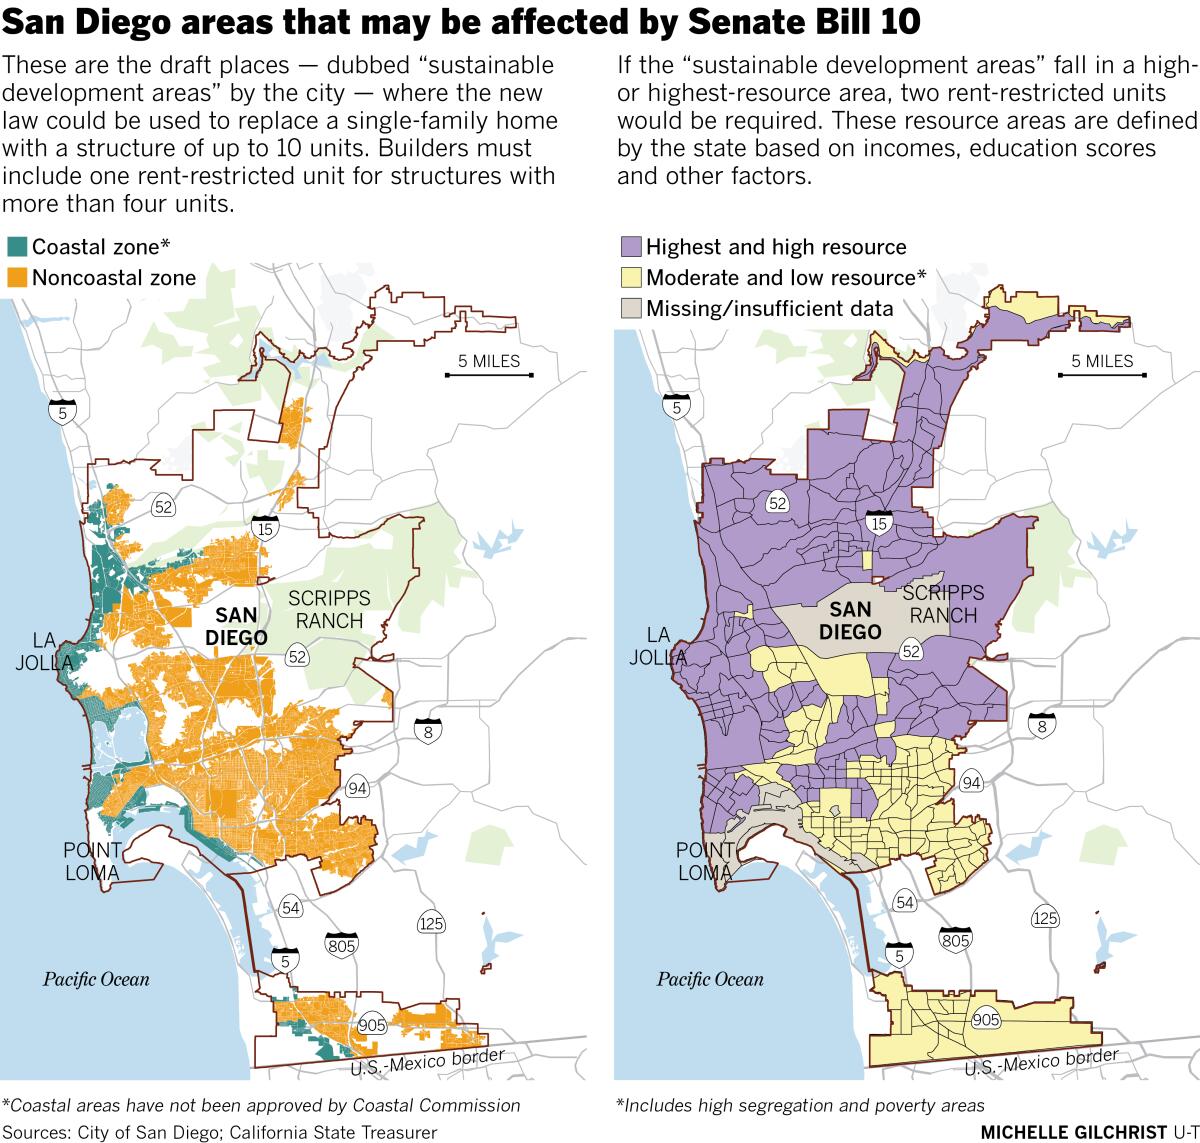 San Diego areas that may be affected by Senate Bill 10